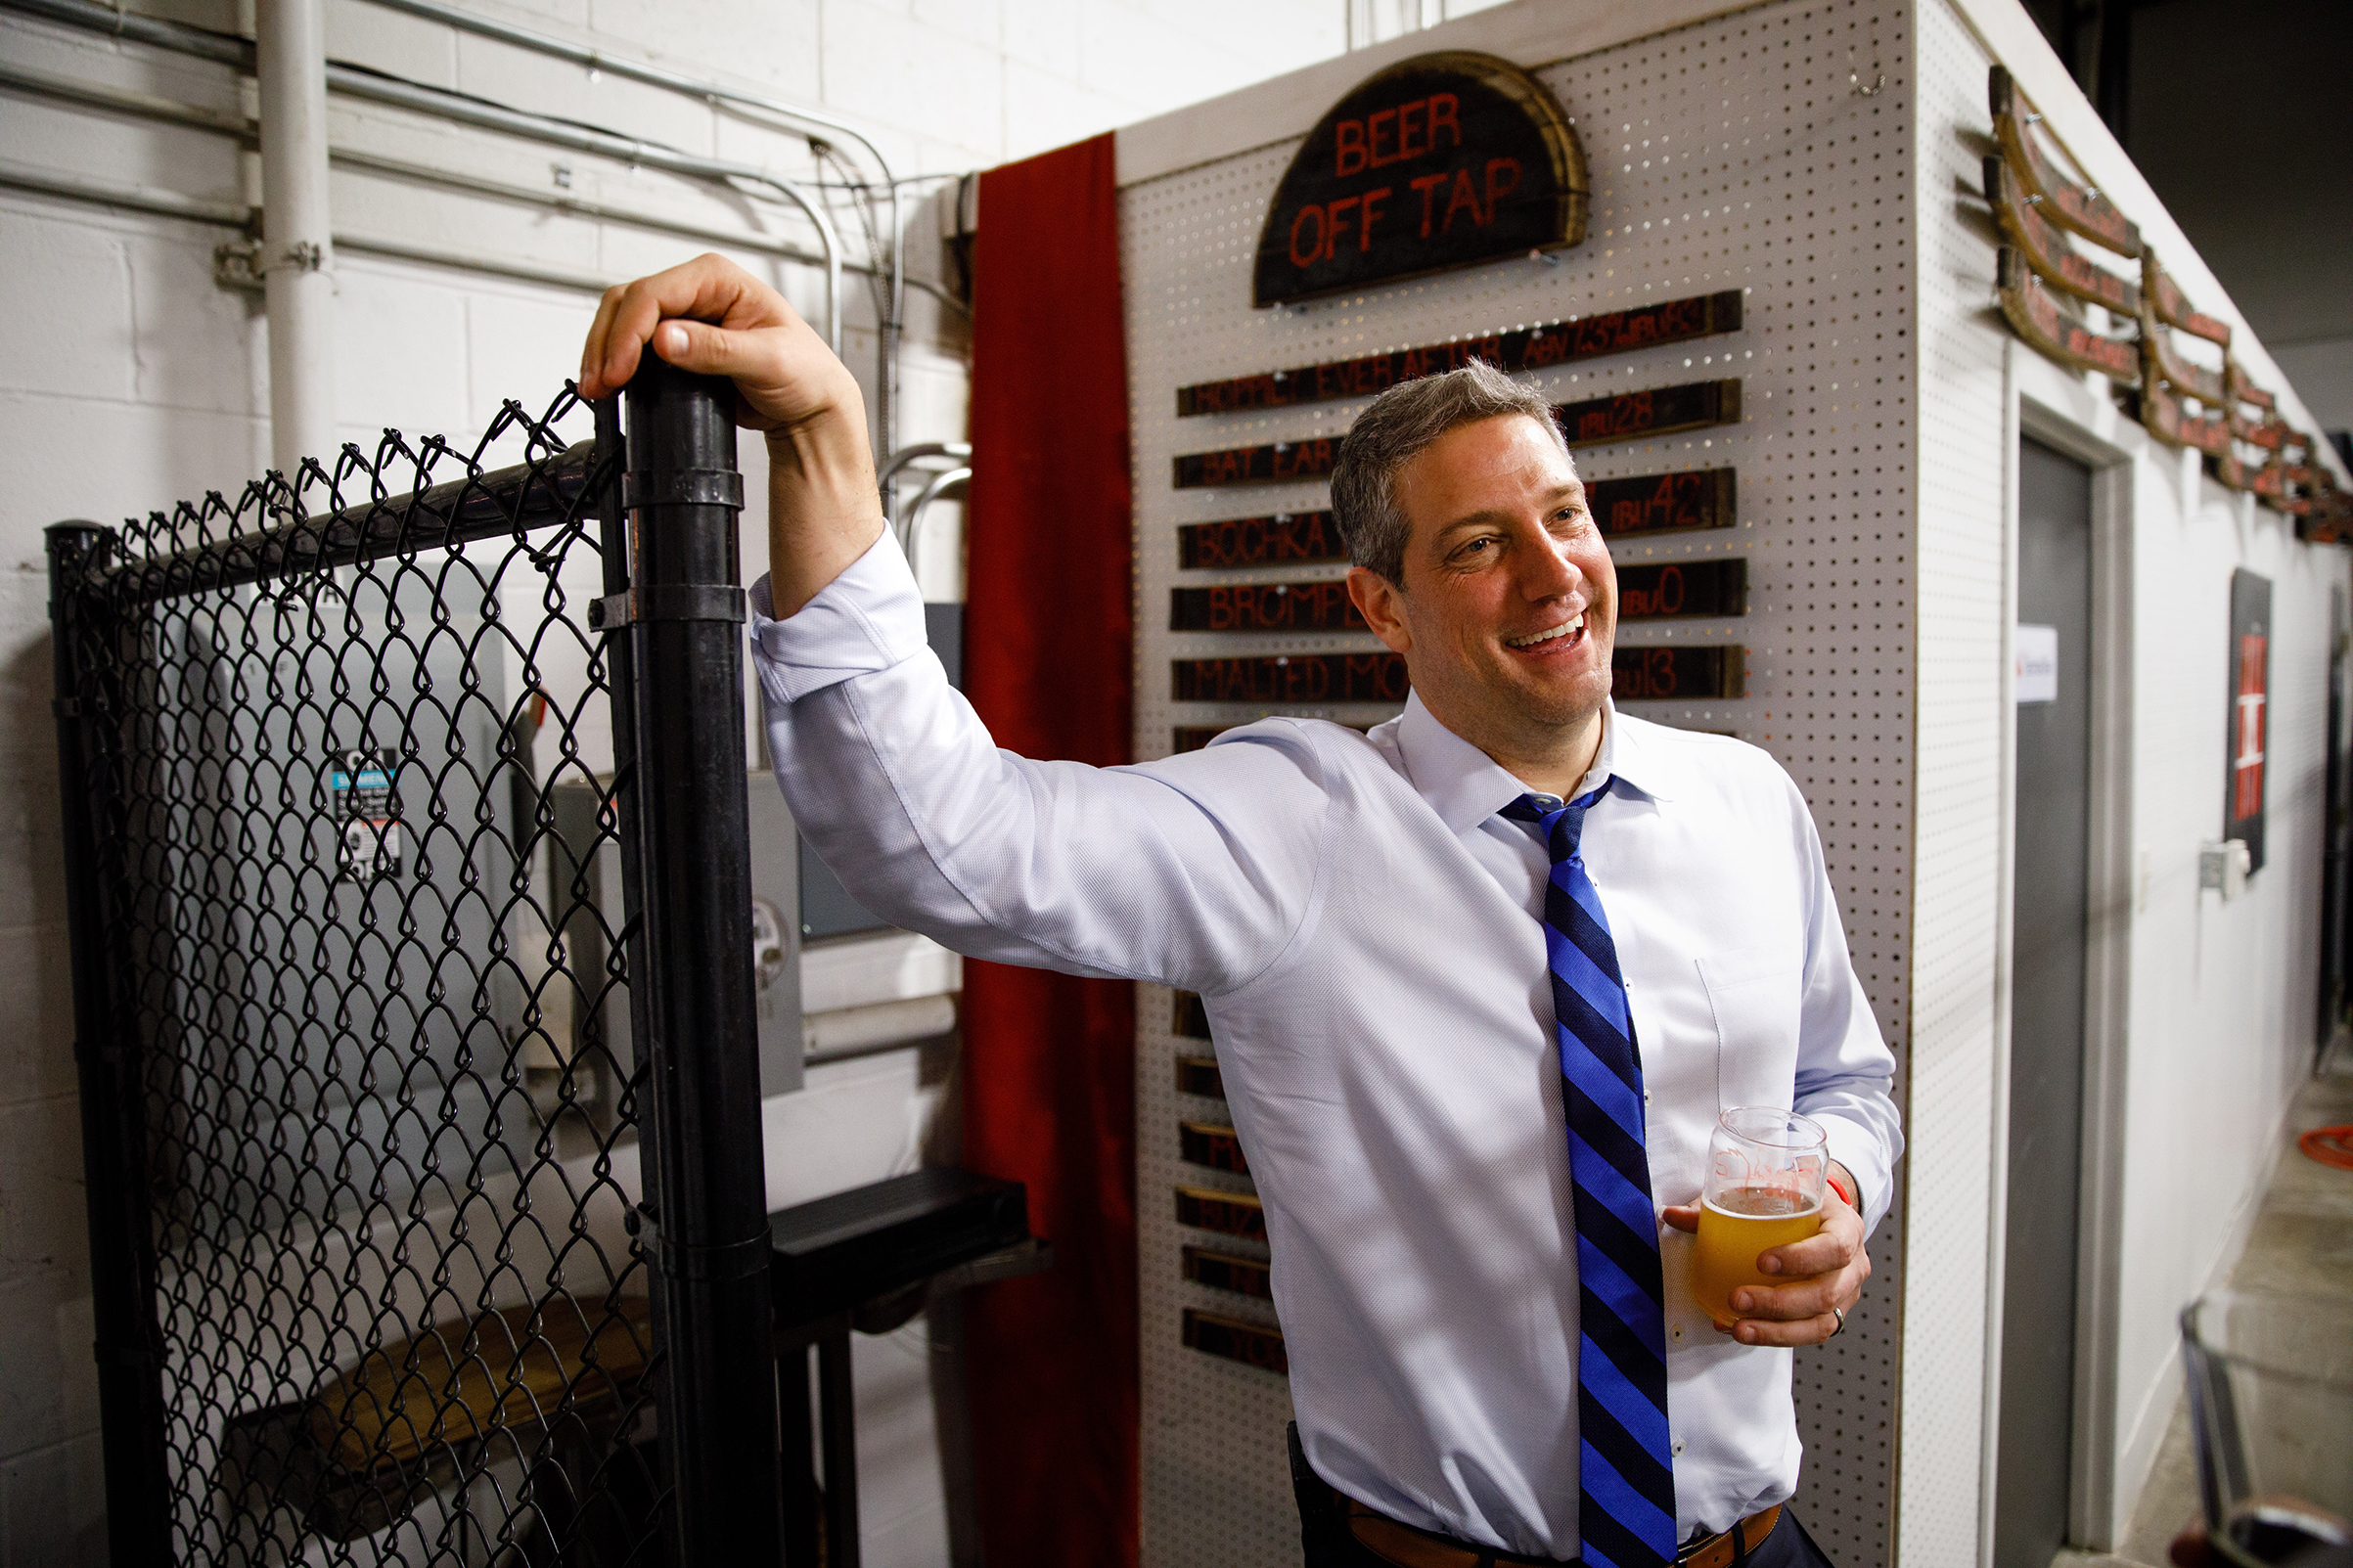 Democratic presidential candidate Tim Ryan after speaking to the Polk County Democrats during a campaign stop at Fox Brewing in West Des Moines, Iowa, April 7 (Scott Morgan for TIME)